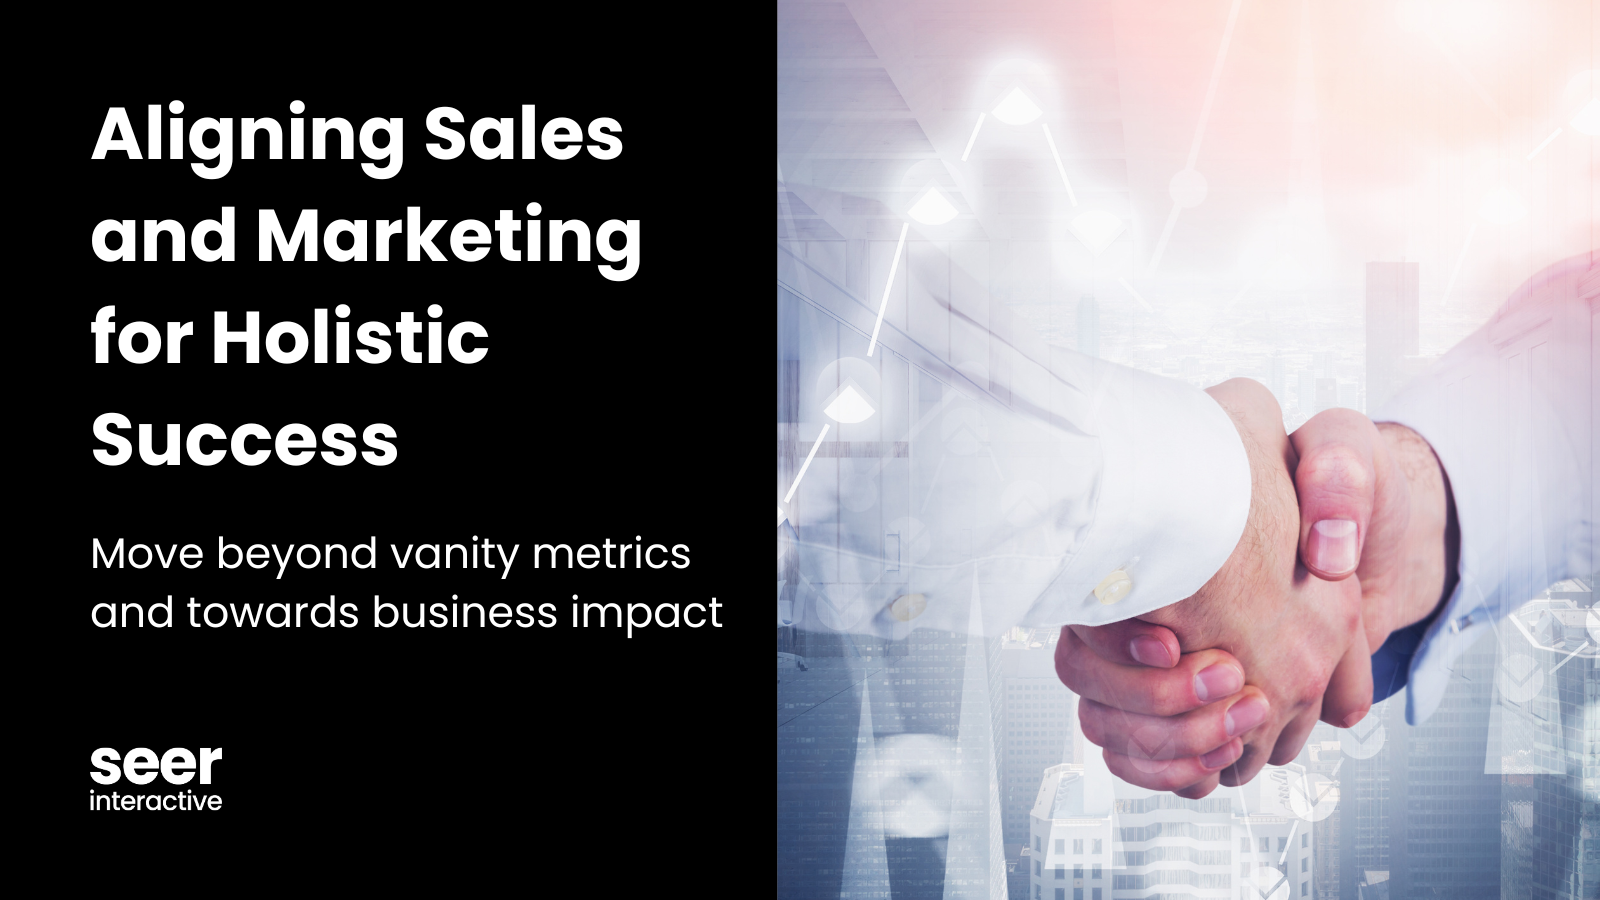 Aligning Sales and Marketing for Holistic Success